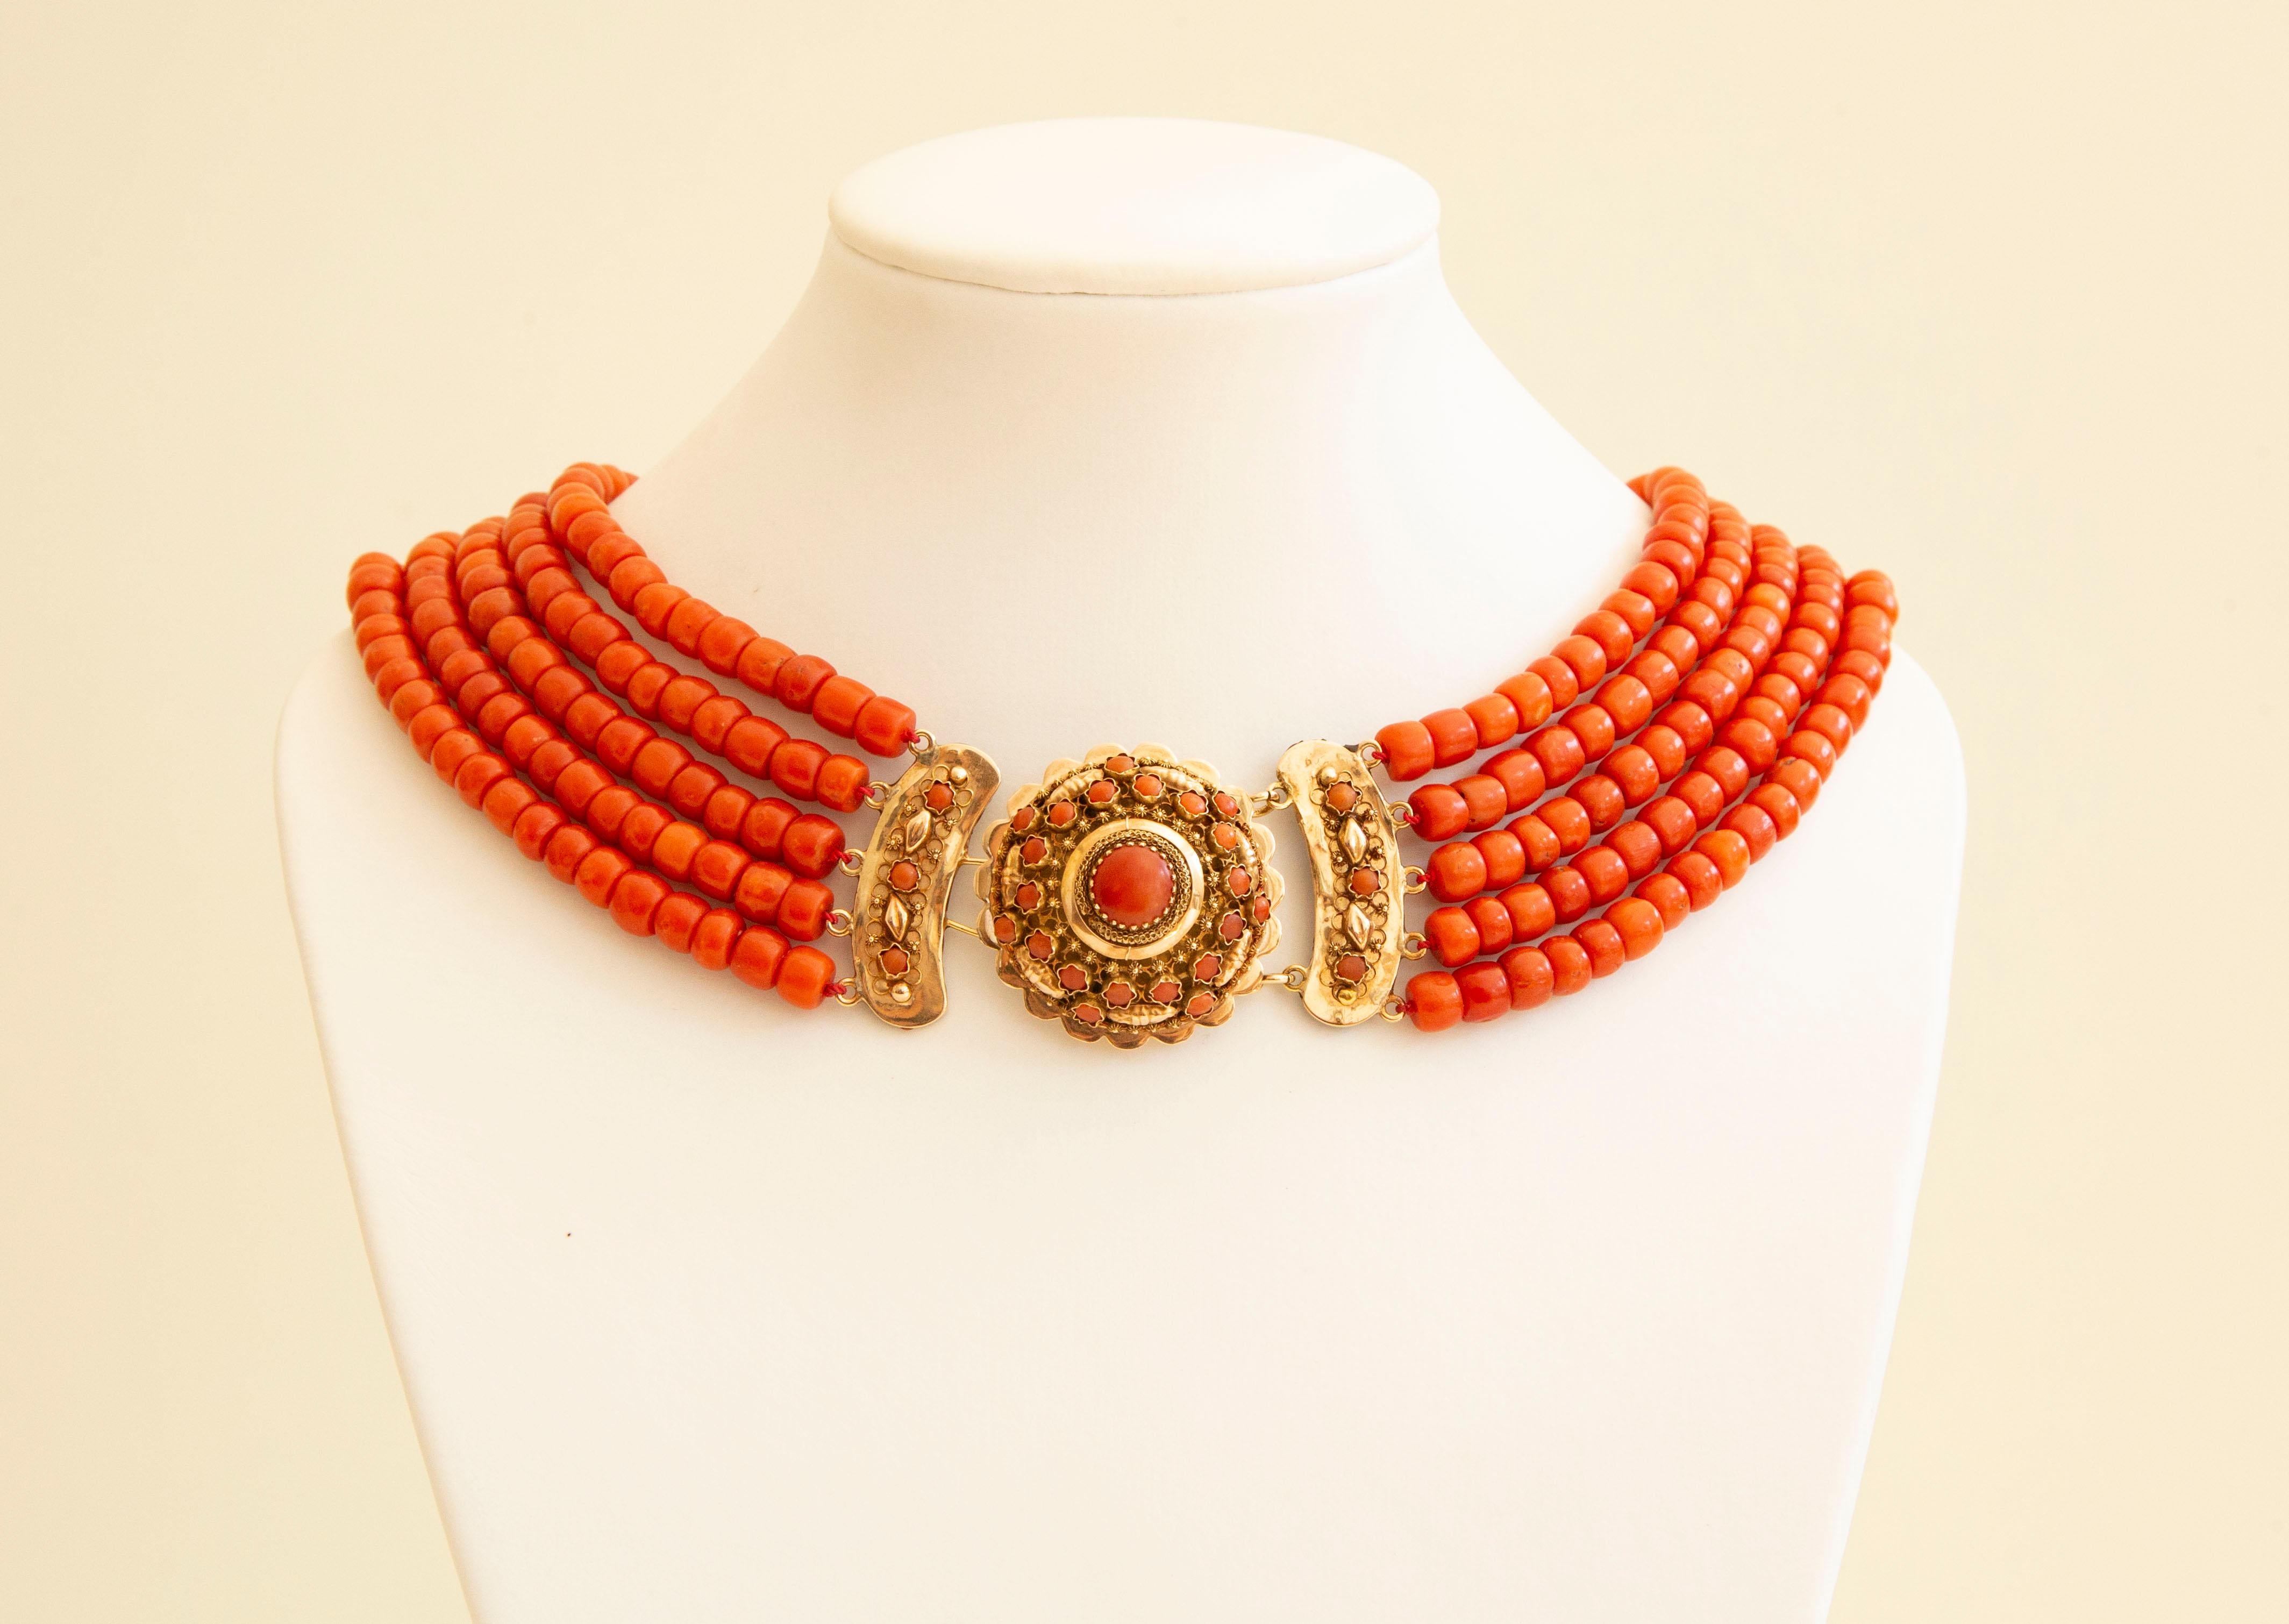 An antique 5-row natural red coral necklace with filigree 14 karat yellow closure decorated with red coral beads. The closure consists of half-dome element featuring a golden filigree wire and cannetille decoration. In the centre there is one red